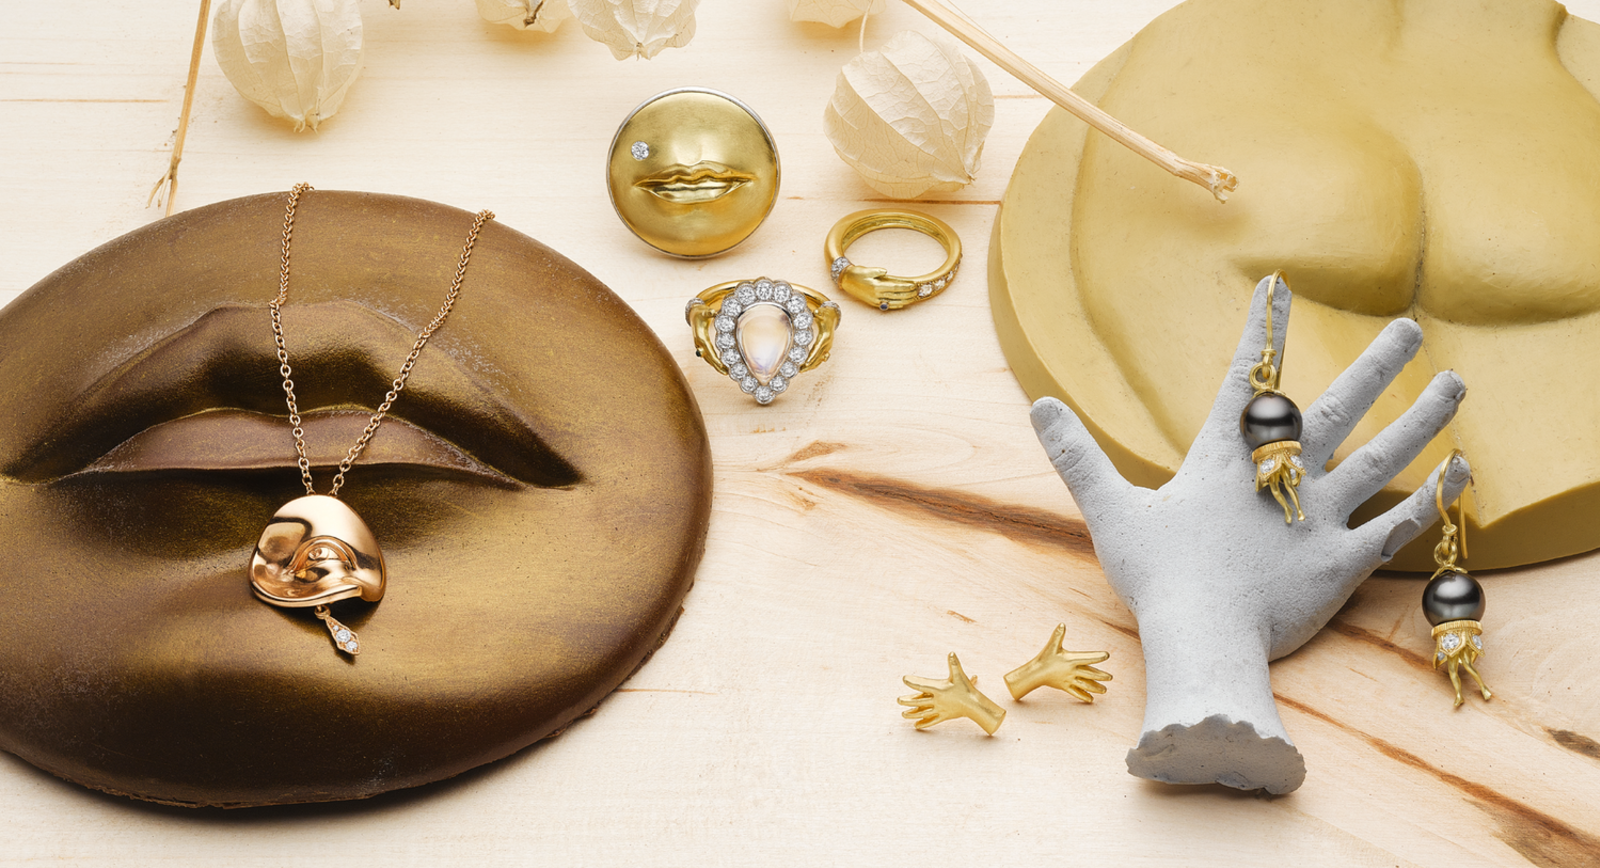 Meet  Anthony Lent – The Master Of Sculptural And Whimsical Jewellery